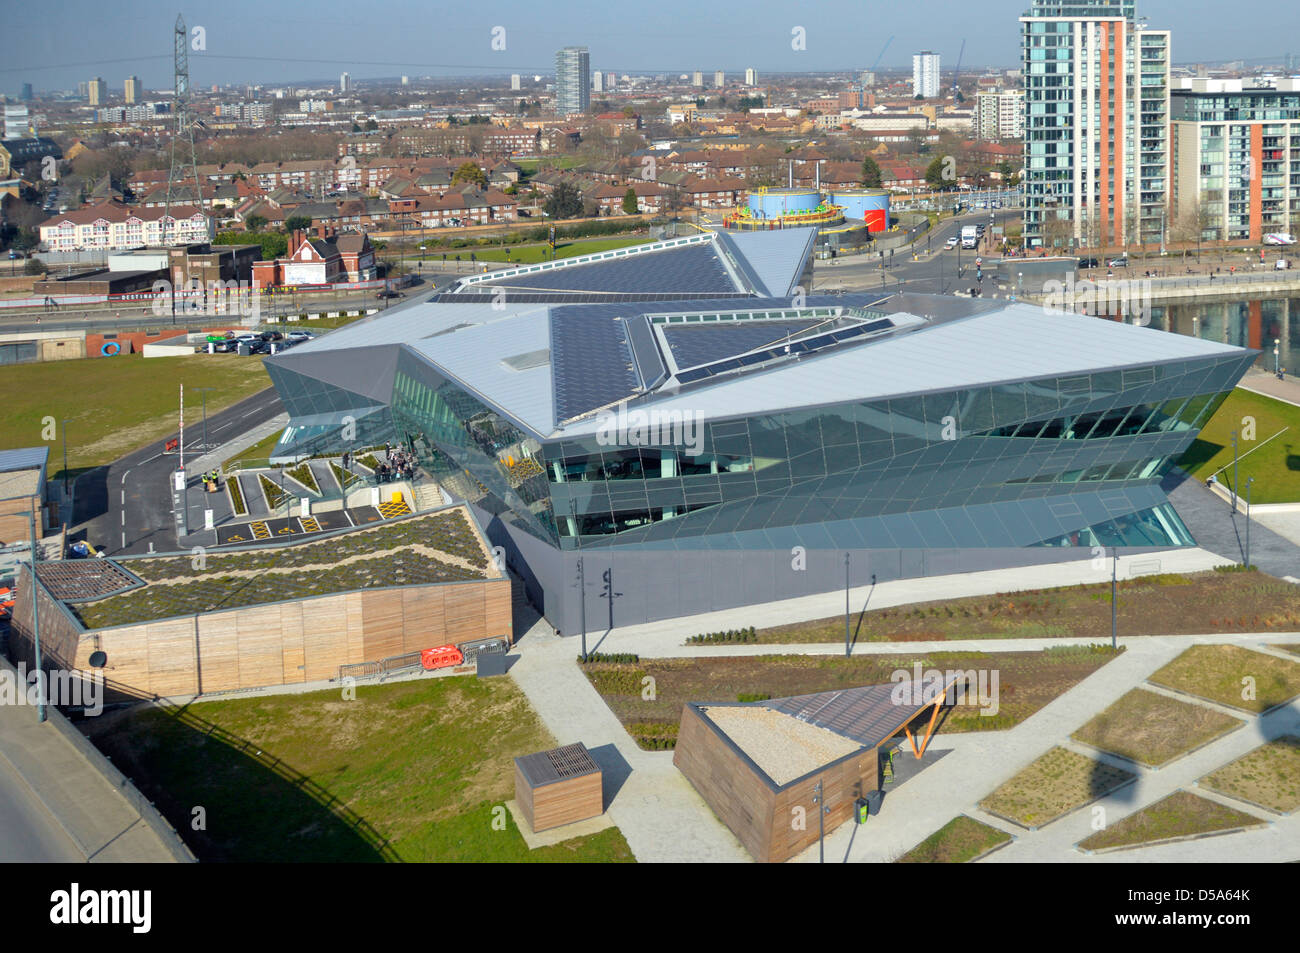 Aerial view Crystal modern building with education displays & exhibition on sustainable city development by Siemens business in East London England UK Stock Photo